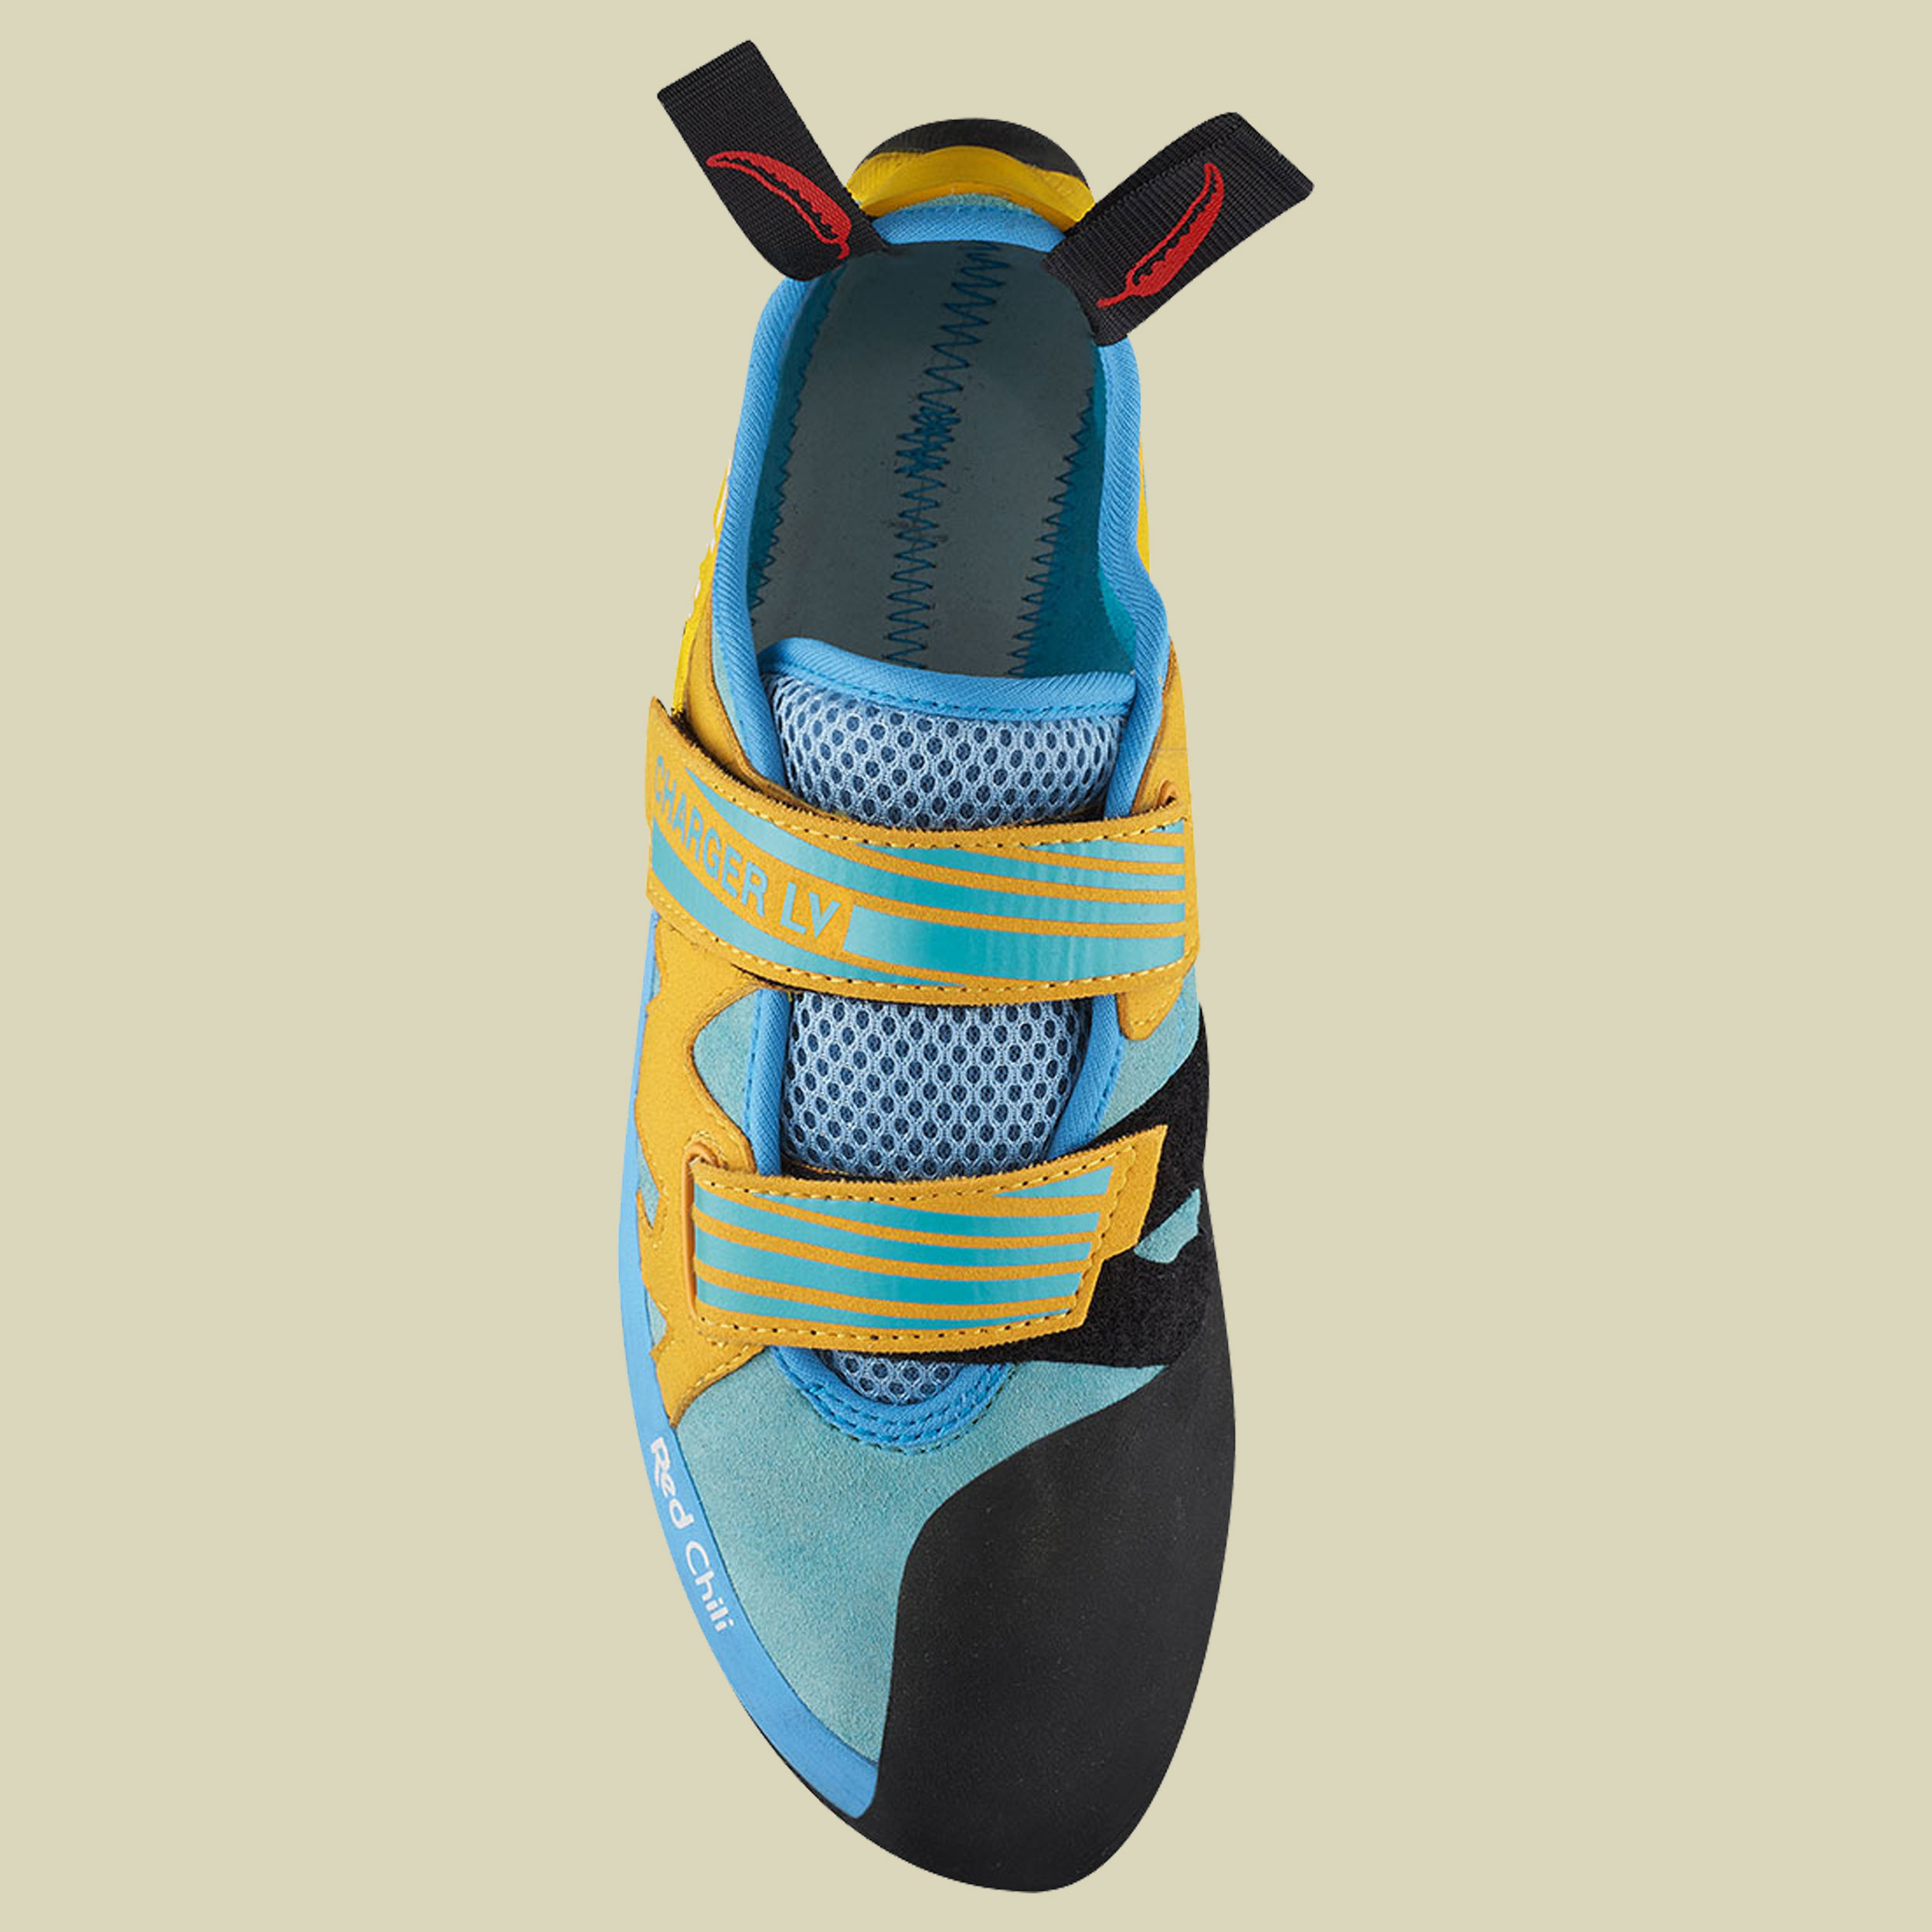 Charger LV Climbing Shoe Unisex Größe UK 3,5 Farbe inkblue 382